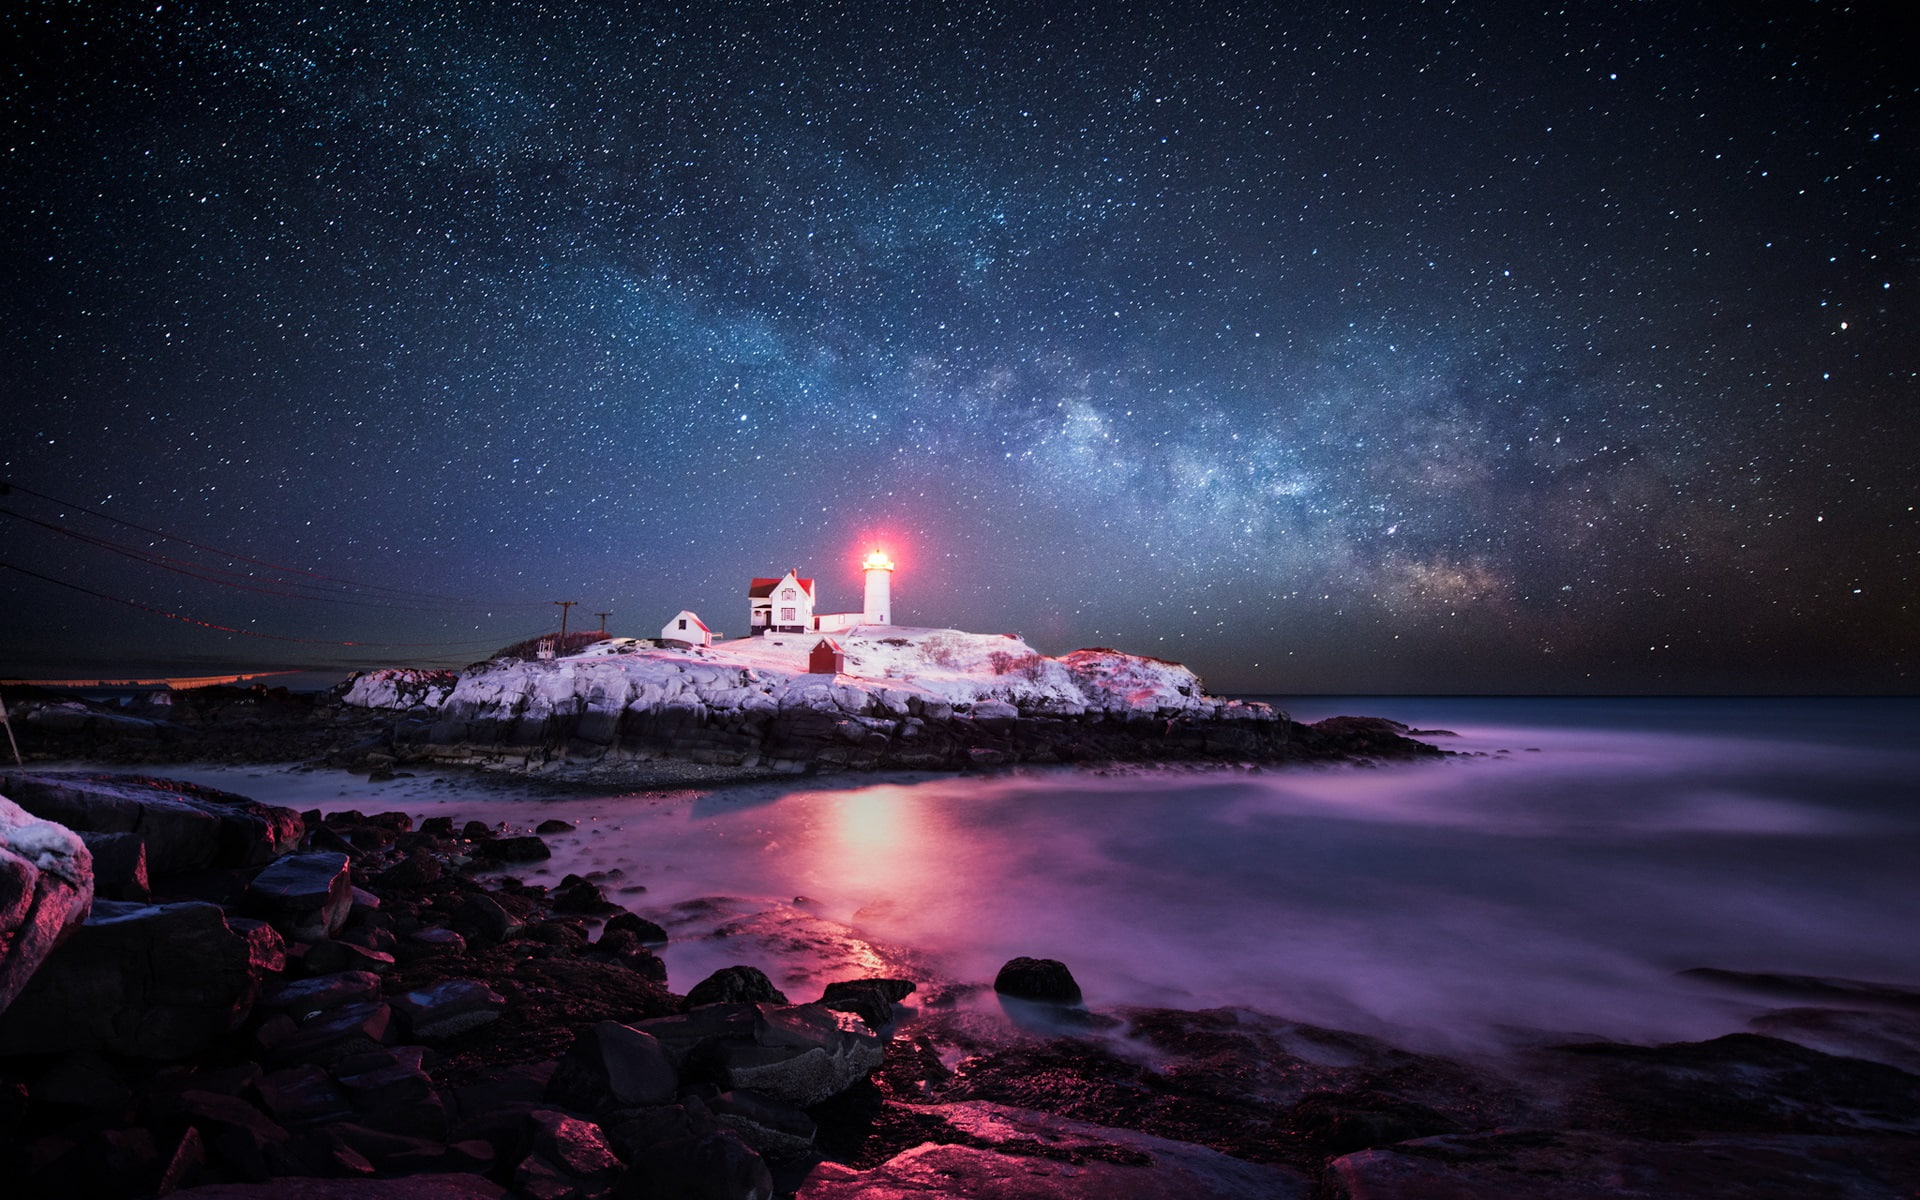 USA, Atlantic Ocean, island, lighthouse, light, sky, stars, white and red lighthouse near bodies of water during nighttime photo